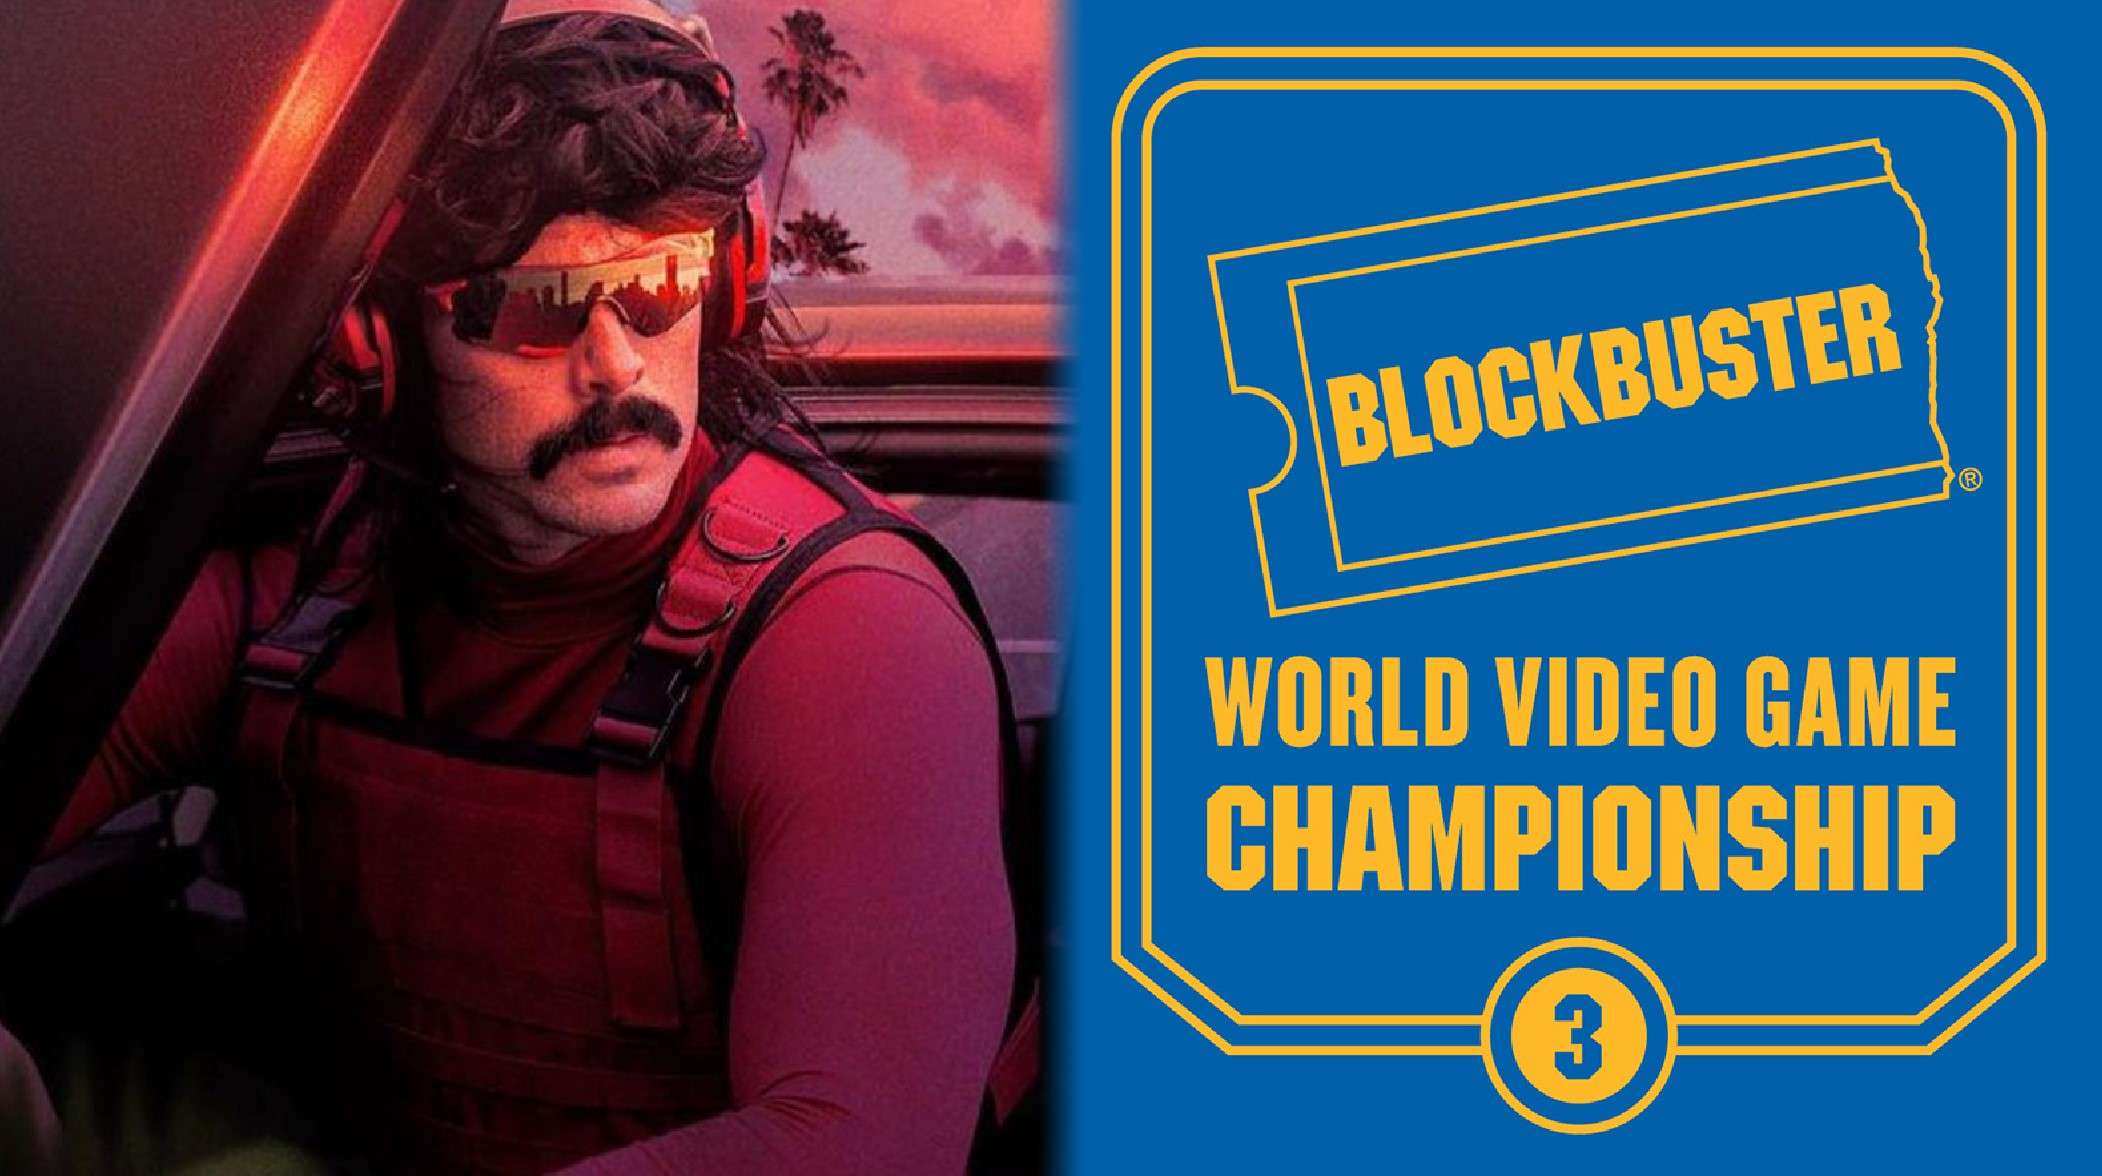 Dr Disrespect next to Blockbuster game championship